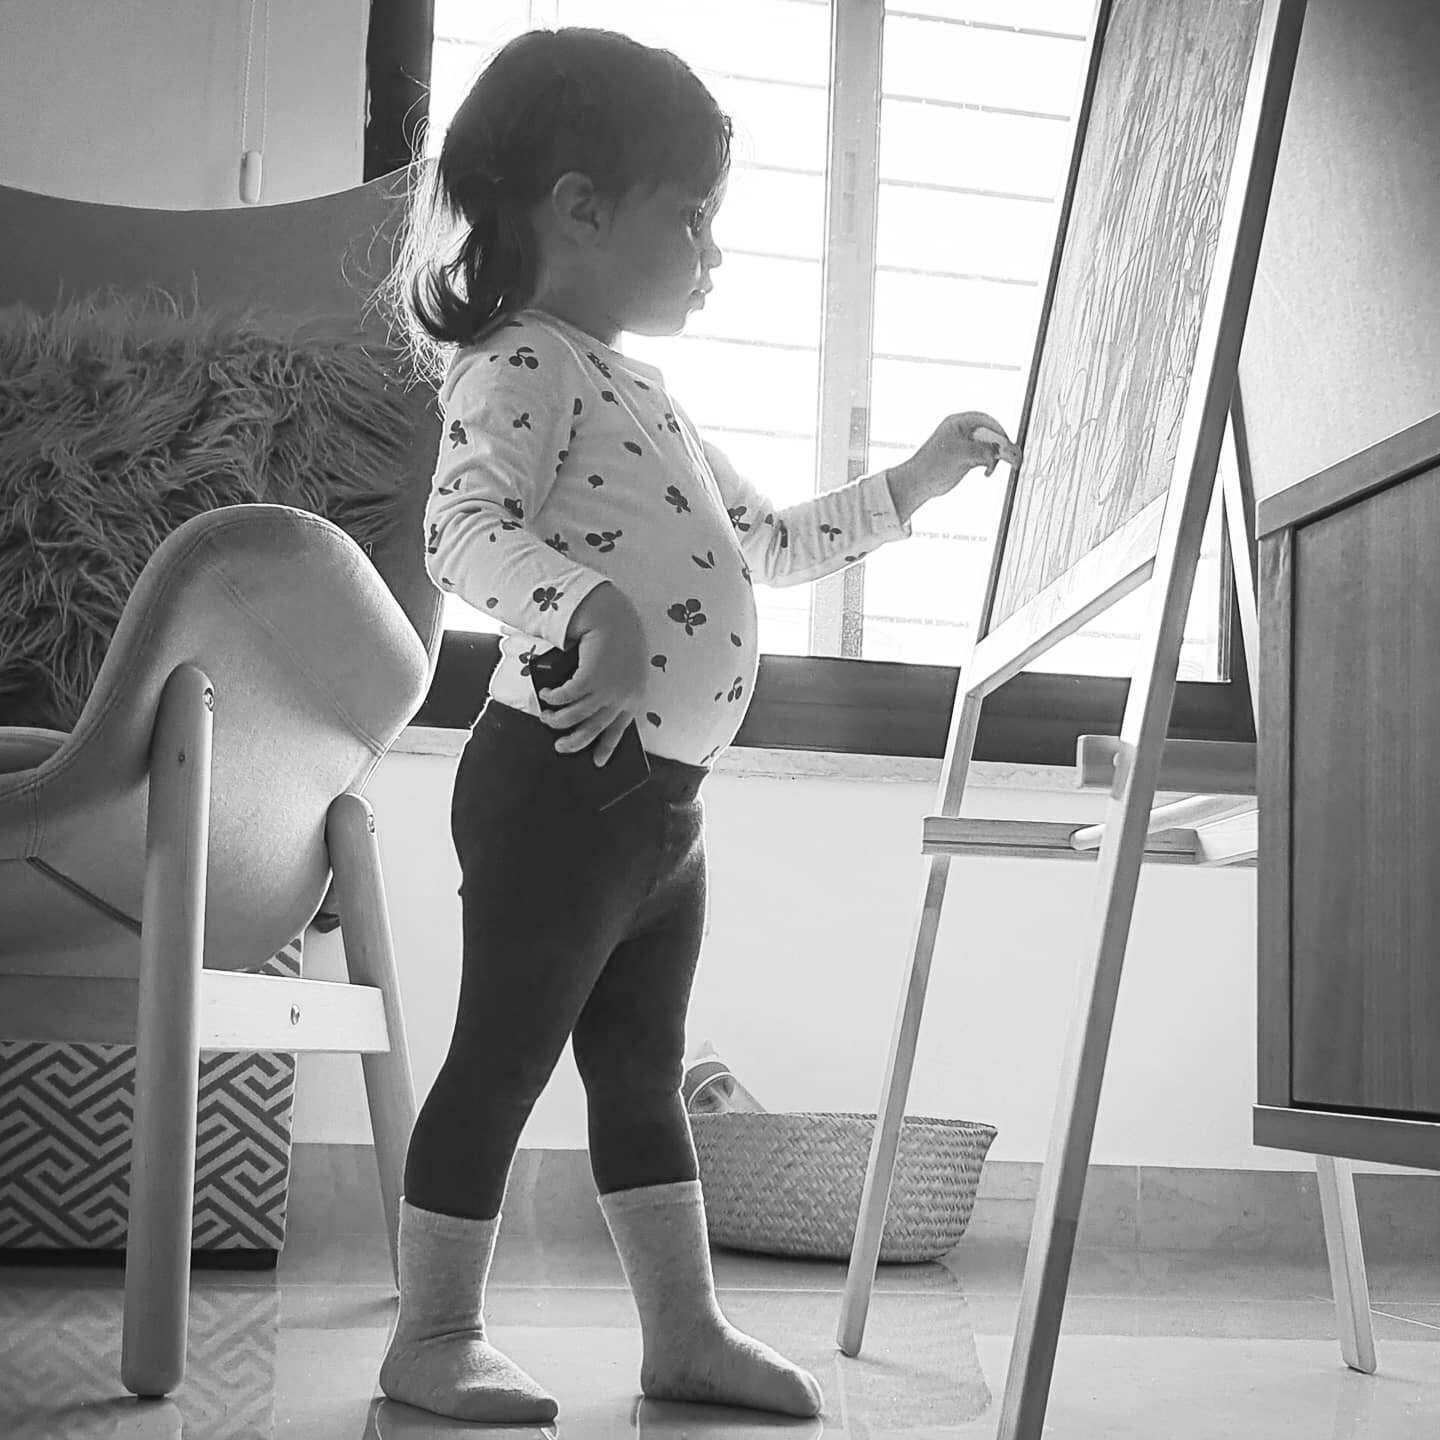 Toddler profiles...
Chubby cheeks, button noses and round heads.
Perfect back posture and the cutest tummy bump.

Every mama sees an endless list of cuteness in their babes...

Admiring my toddler's side profile ♡